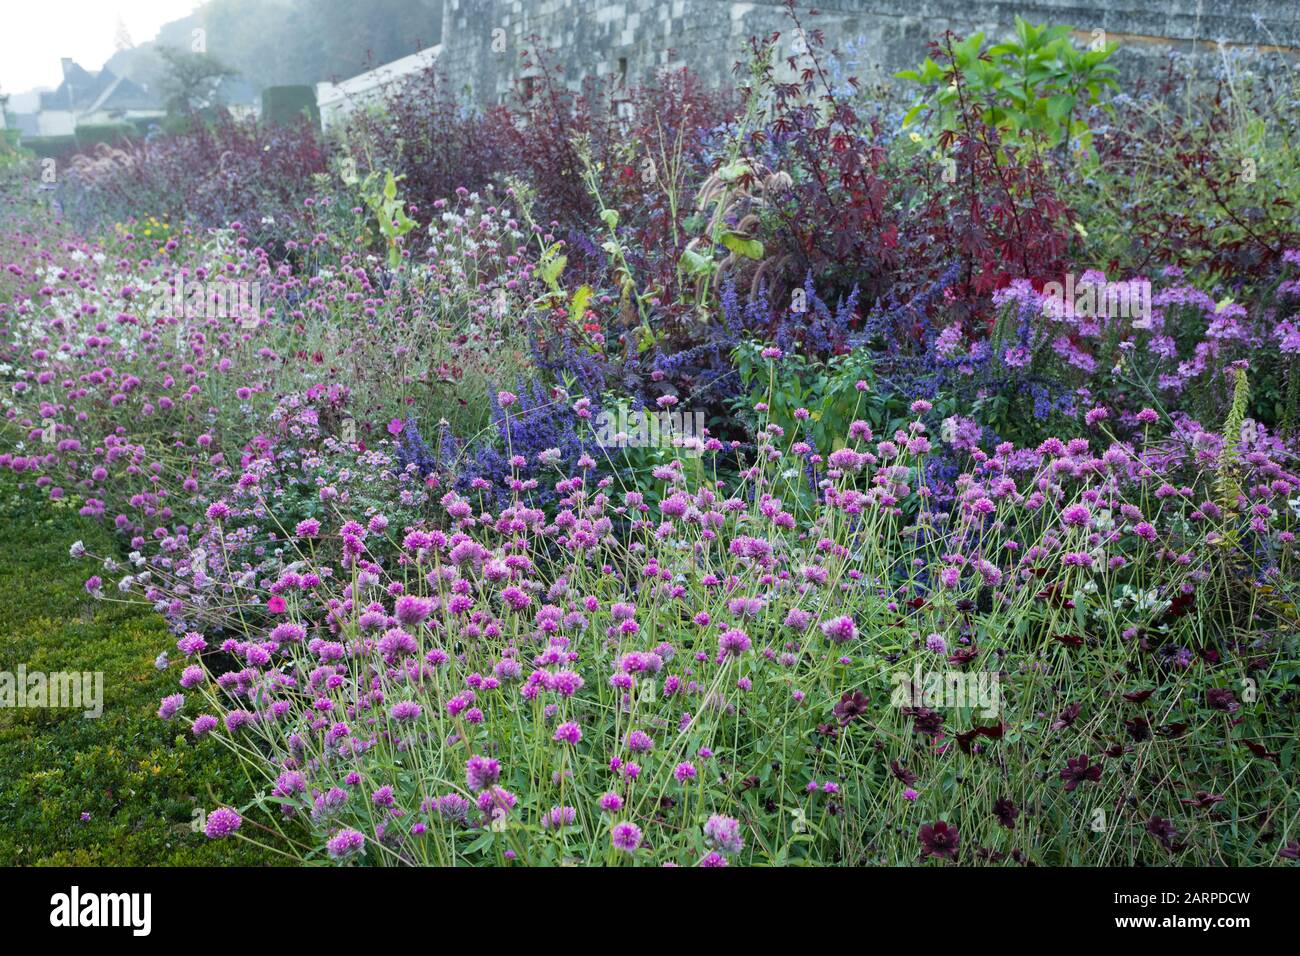 France, Indre et Loire, Loire Valley listed as World Heritage by UNESCO, Rigny Usse, Chateau d’Usse gardens, annuals plants flowerbed in October with Stock Photo